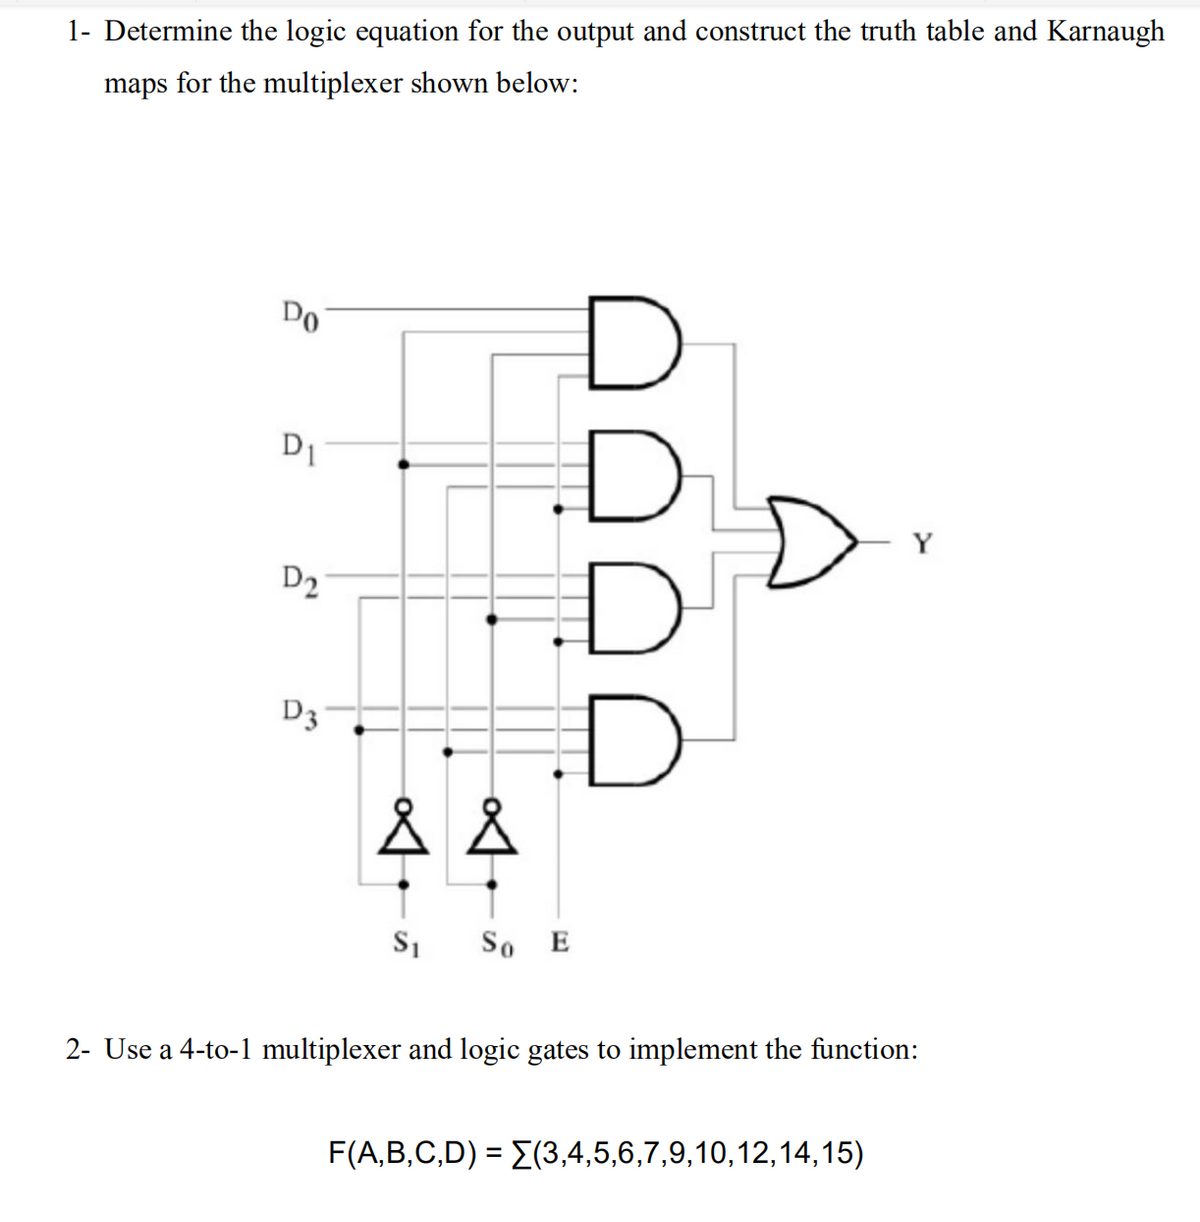 1- Determine the logic equation for the output and construct the truth table and Karnaugh
maps for the multiplexer shown below:
Do
D1
Y
D2
D3
So E
2- Use a 4-to-1 multiplexer and logic gates to implement the function:
F(A,B,C,D) = E(3,4,5,6,7,9,10,12,14,15)
